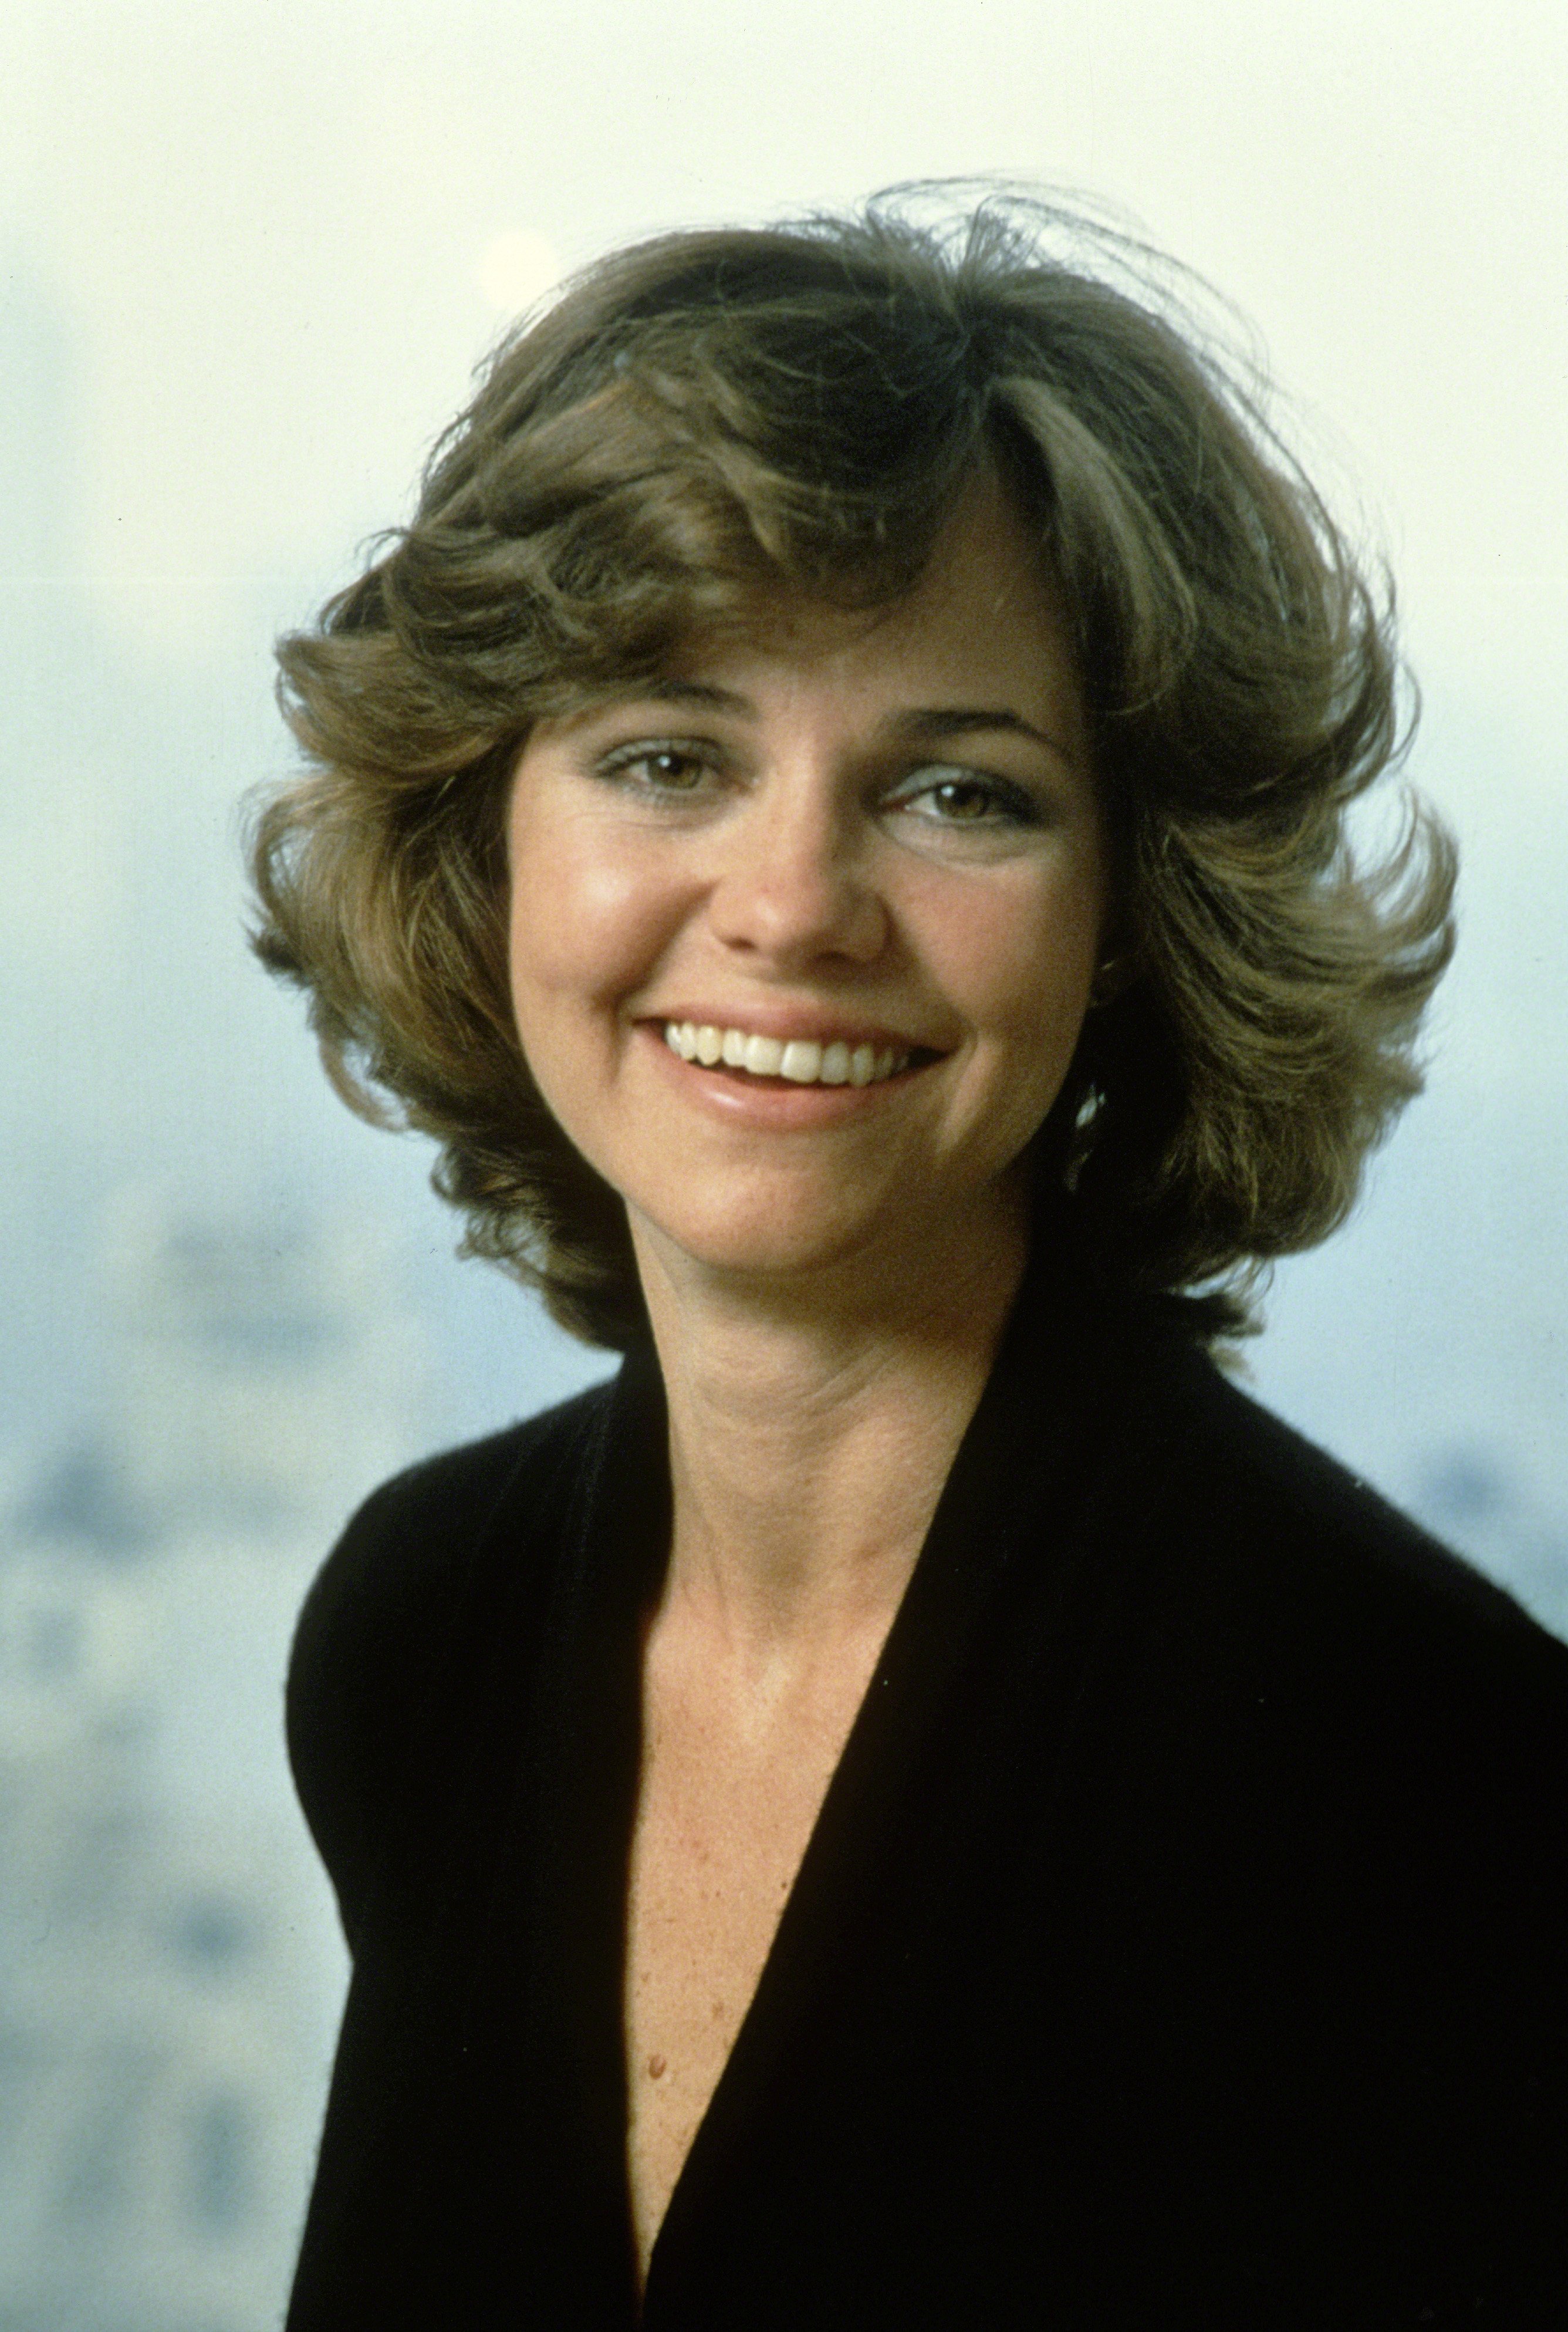 Sally Field circa 1979 in New York City. | Source: Getty Images